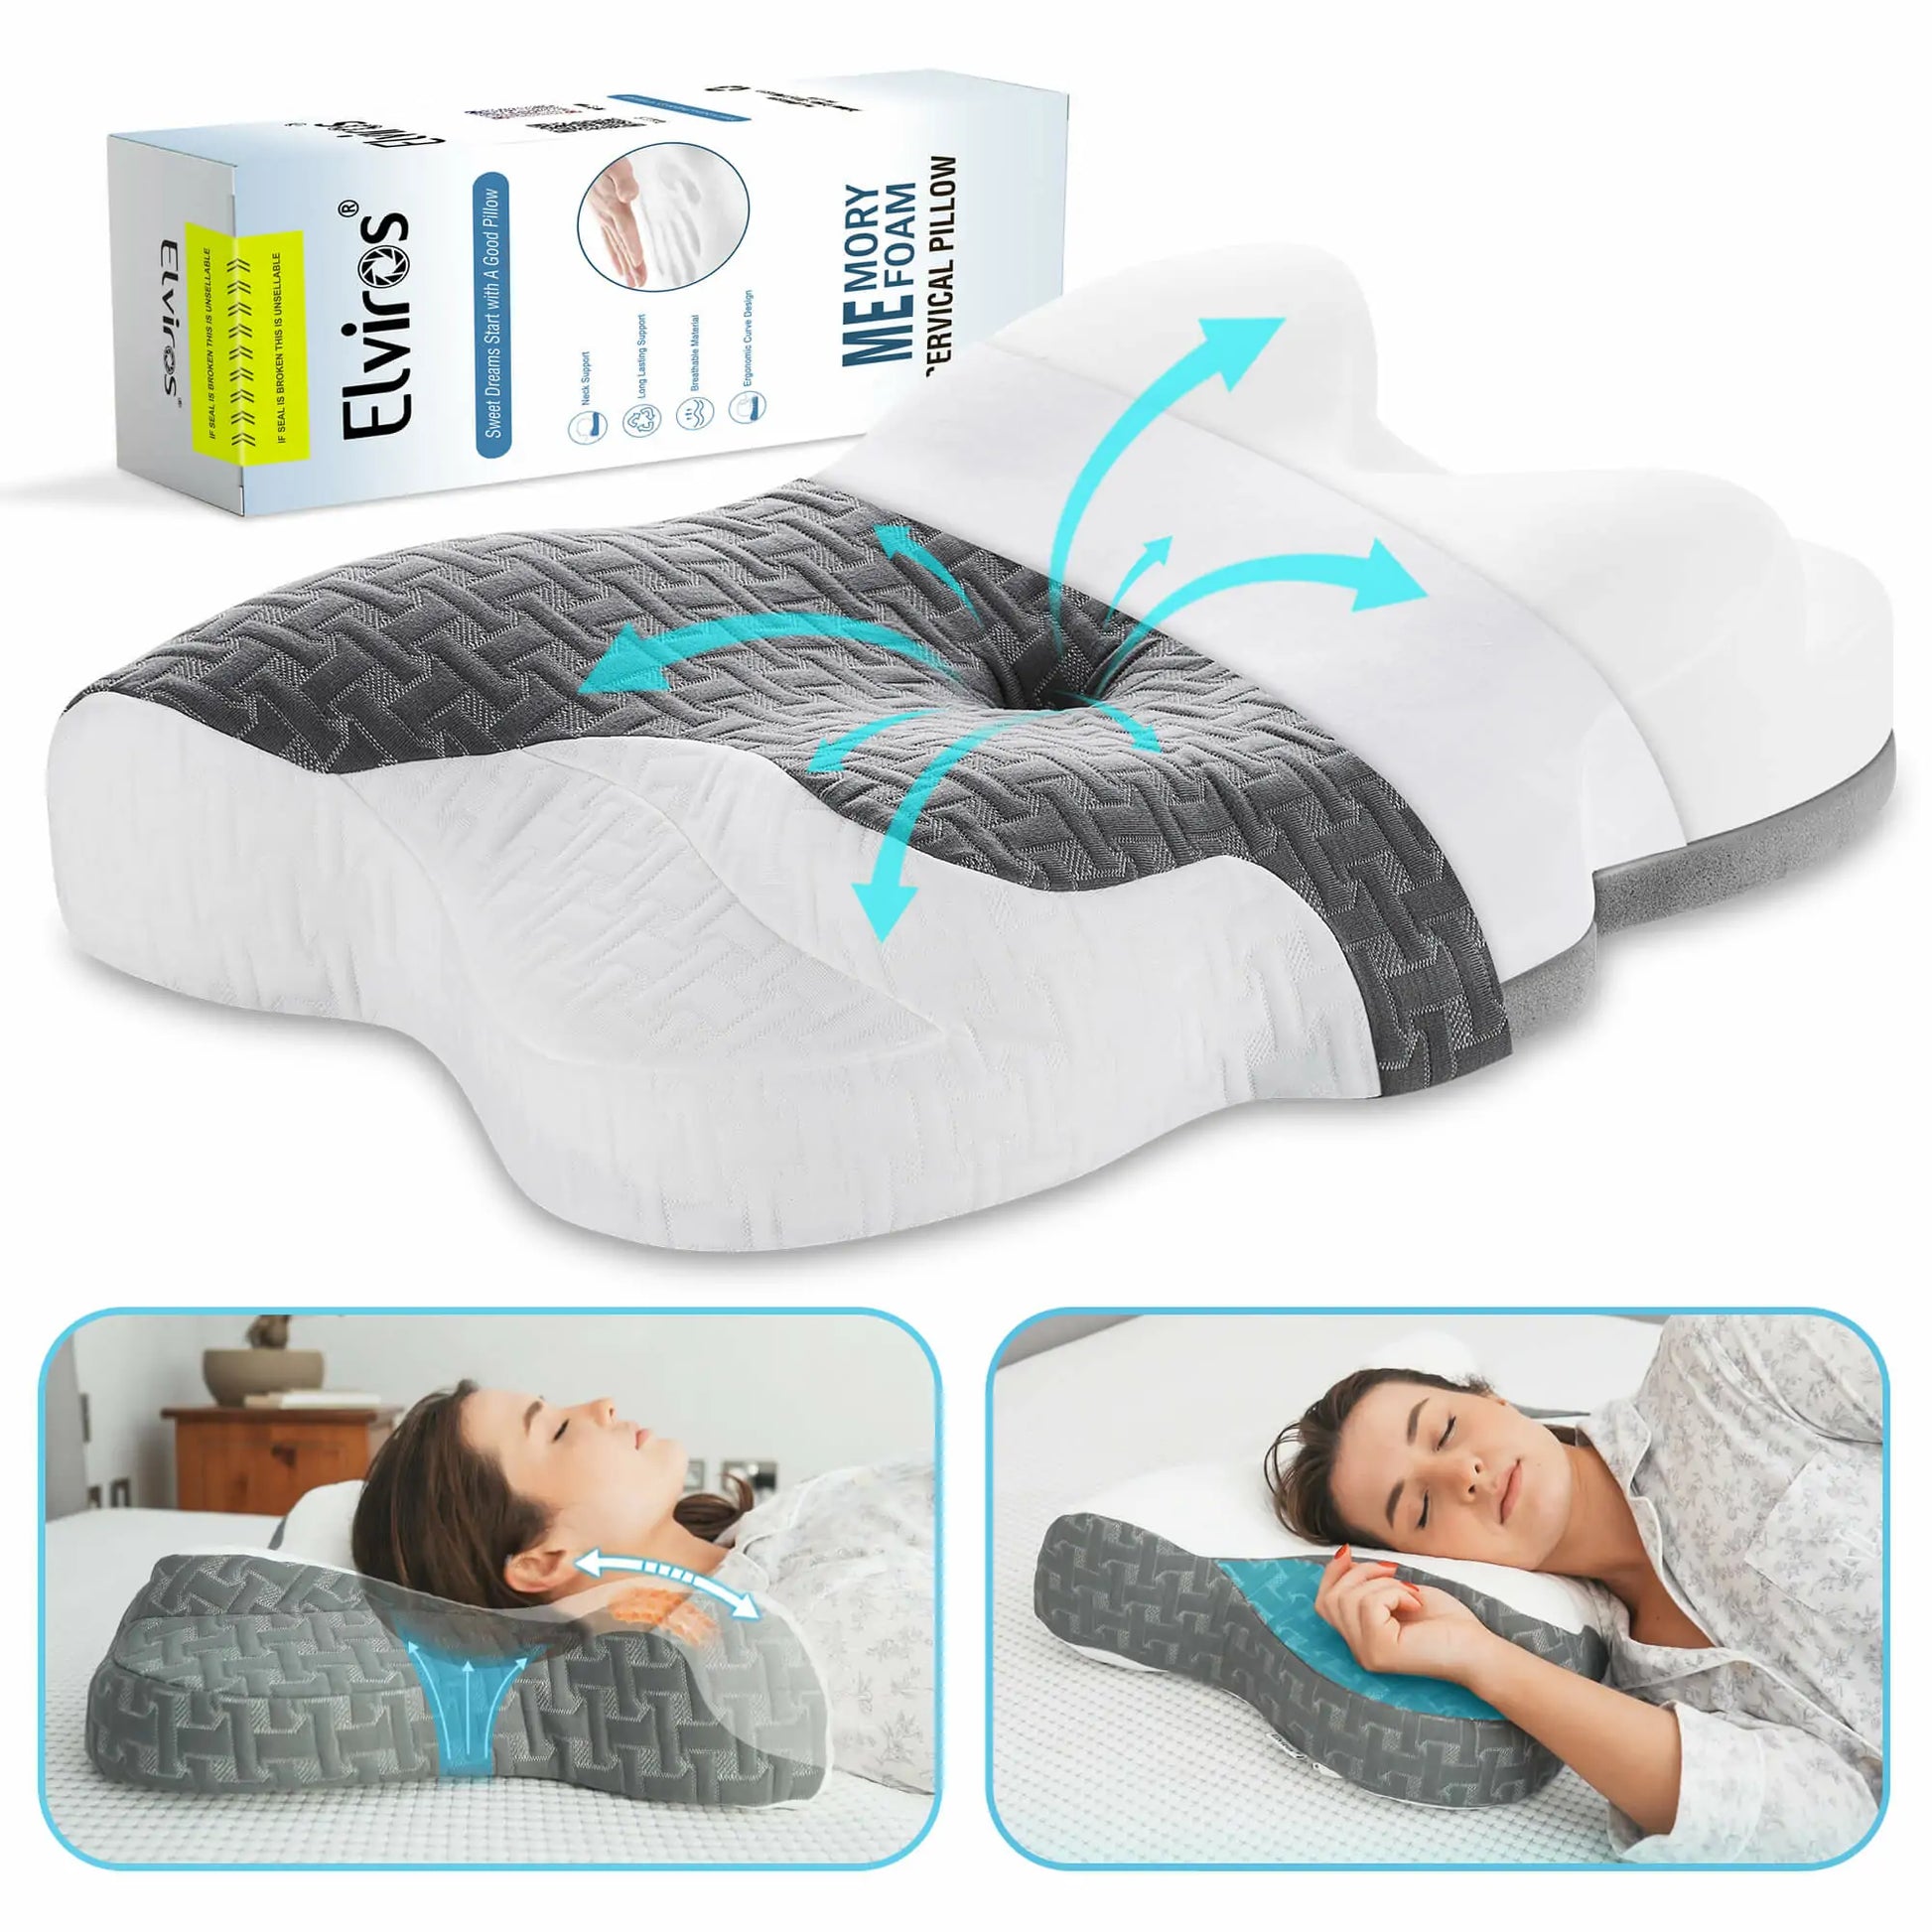 Elviros Cervical Memory Foam Pillow, Contour Pillows for Neck and Shoulder Pain, Ergonomic Orthopedic Sleeping Neck Contoured Support Pillow for